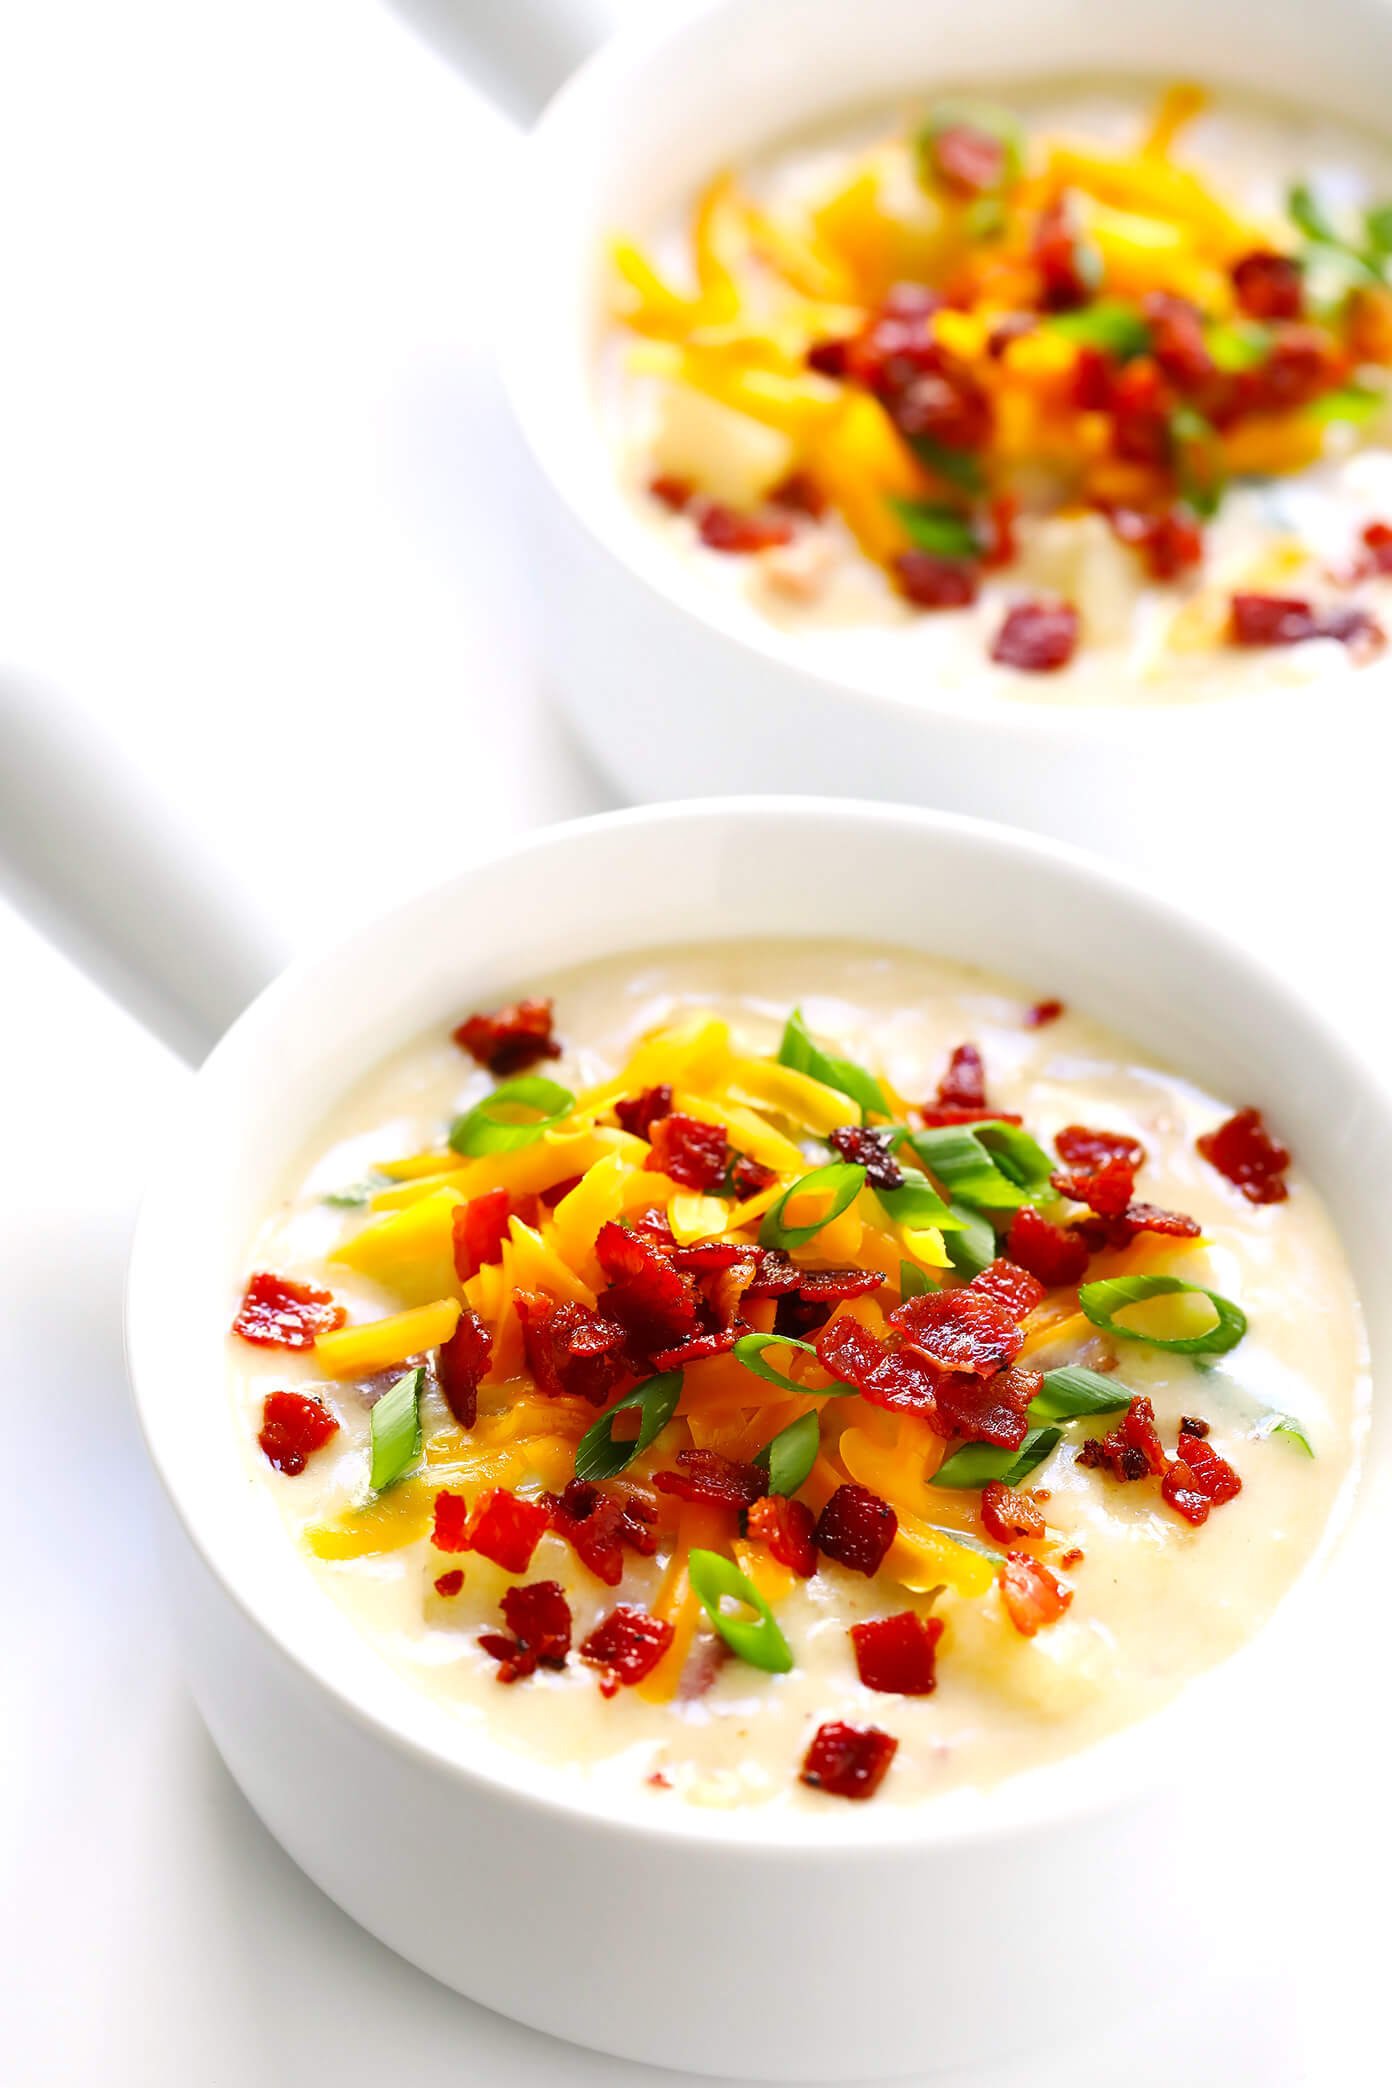 Homemade Potato Soup with Bacon and Cheddar